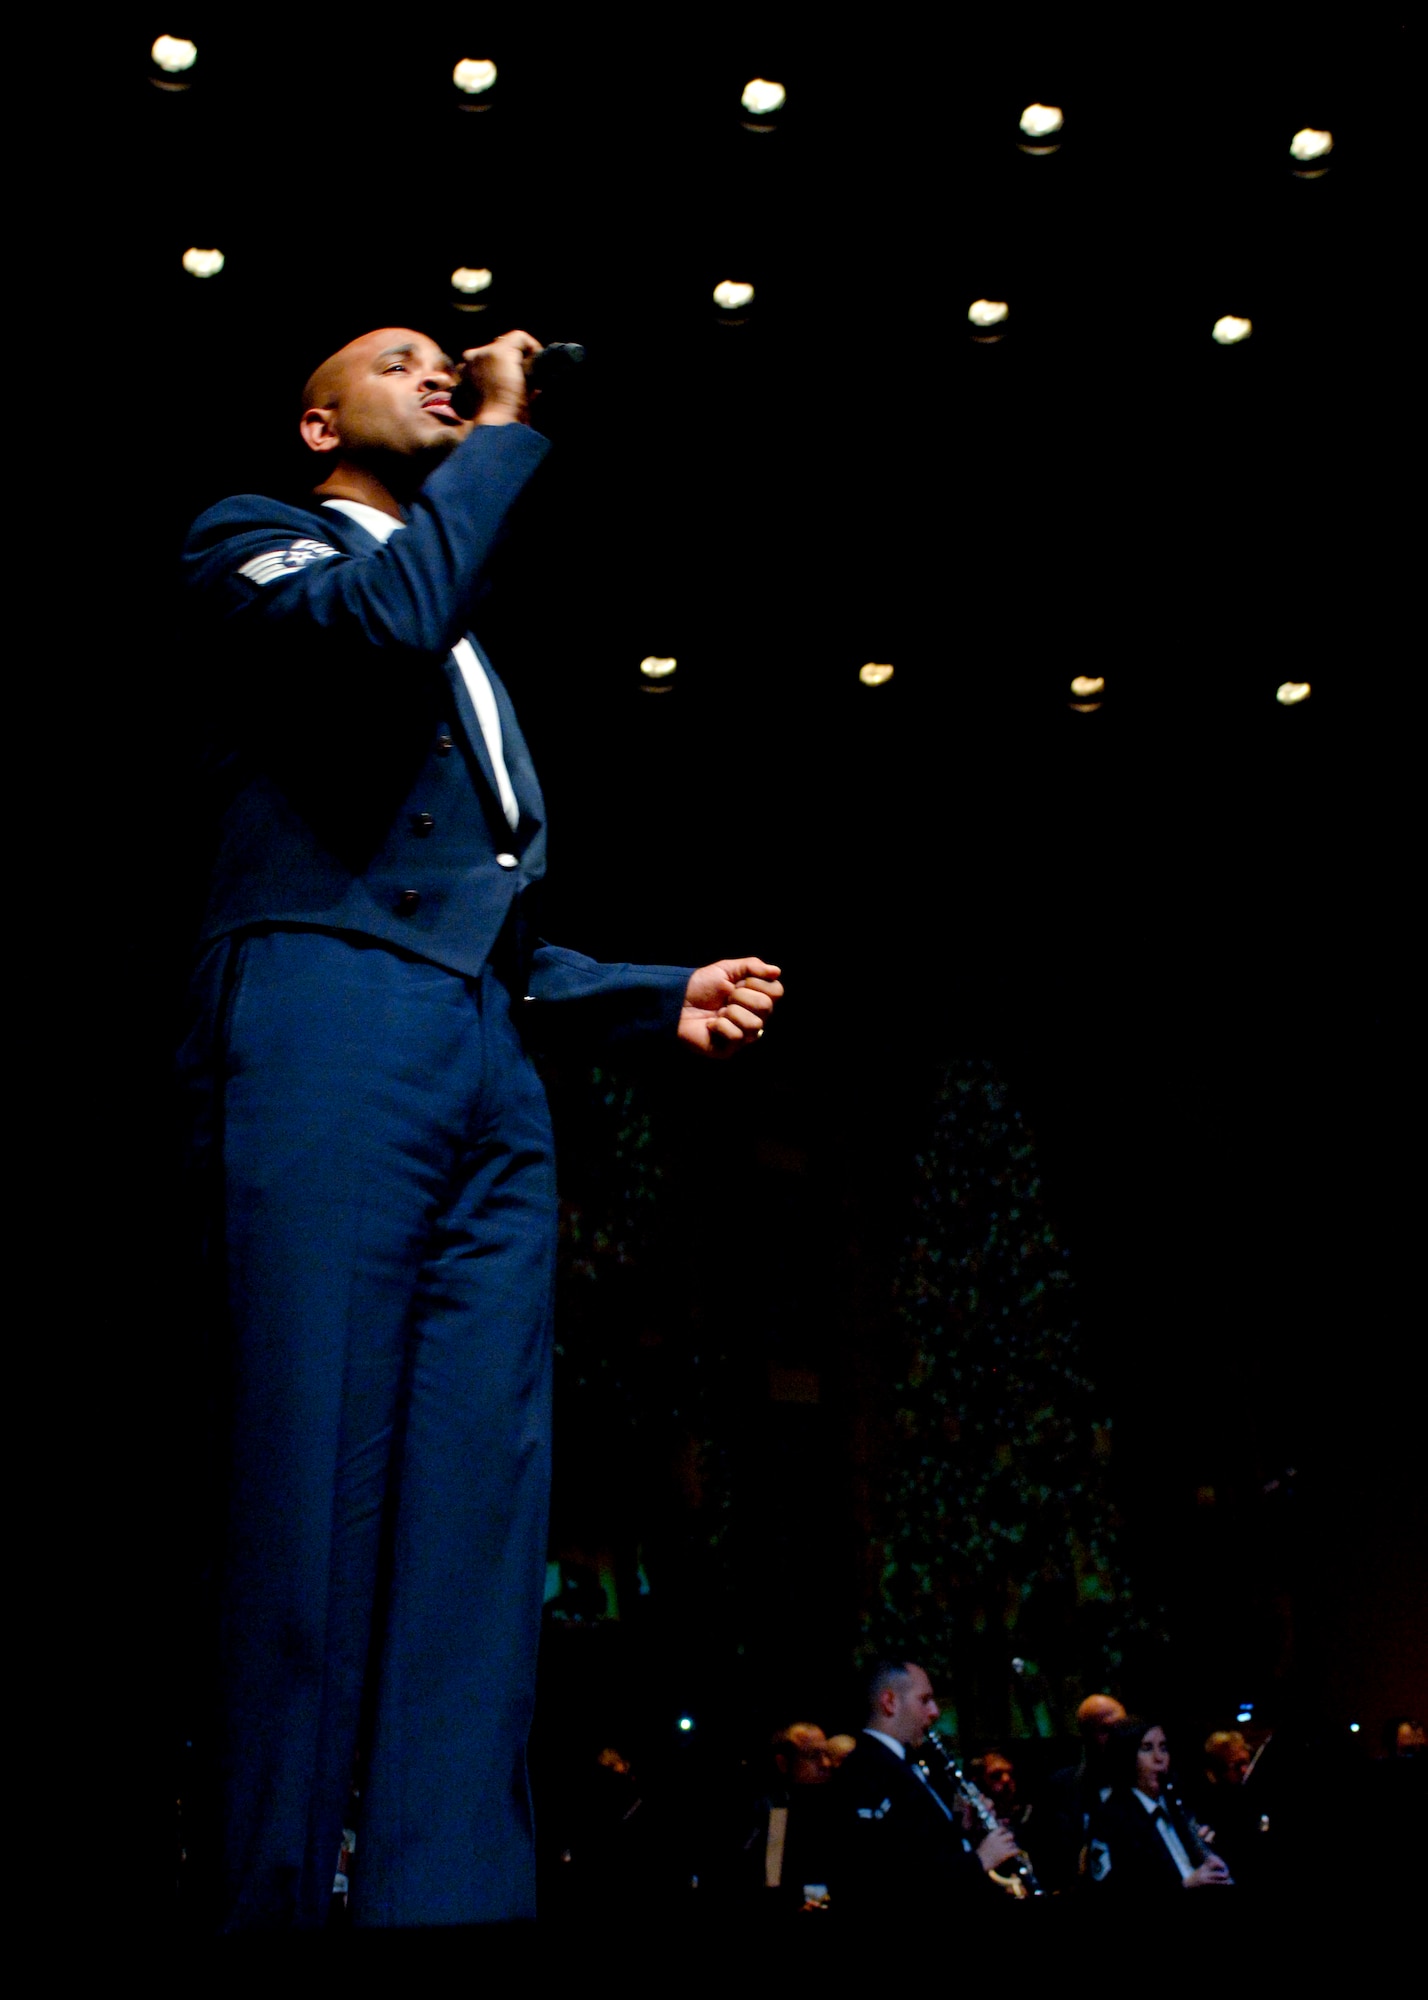 Staff Sgt. Kelcey McDonald, U.S. Air Force Heritage of America Band audio engineer, performs during the band’s holiday concert series Dec. 7, 2012, at Christopher Newport University’s Ferguson Hall , Newport News, Va. McDonald’s musical career started at a young age, when he discovered his singing talent. (U.S. Air Force photo by Airman 1st Class R. Alex Durbin/Released)